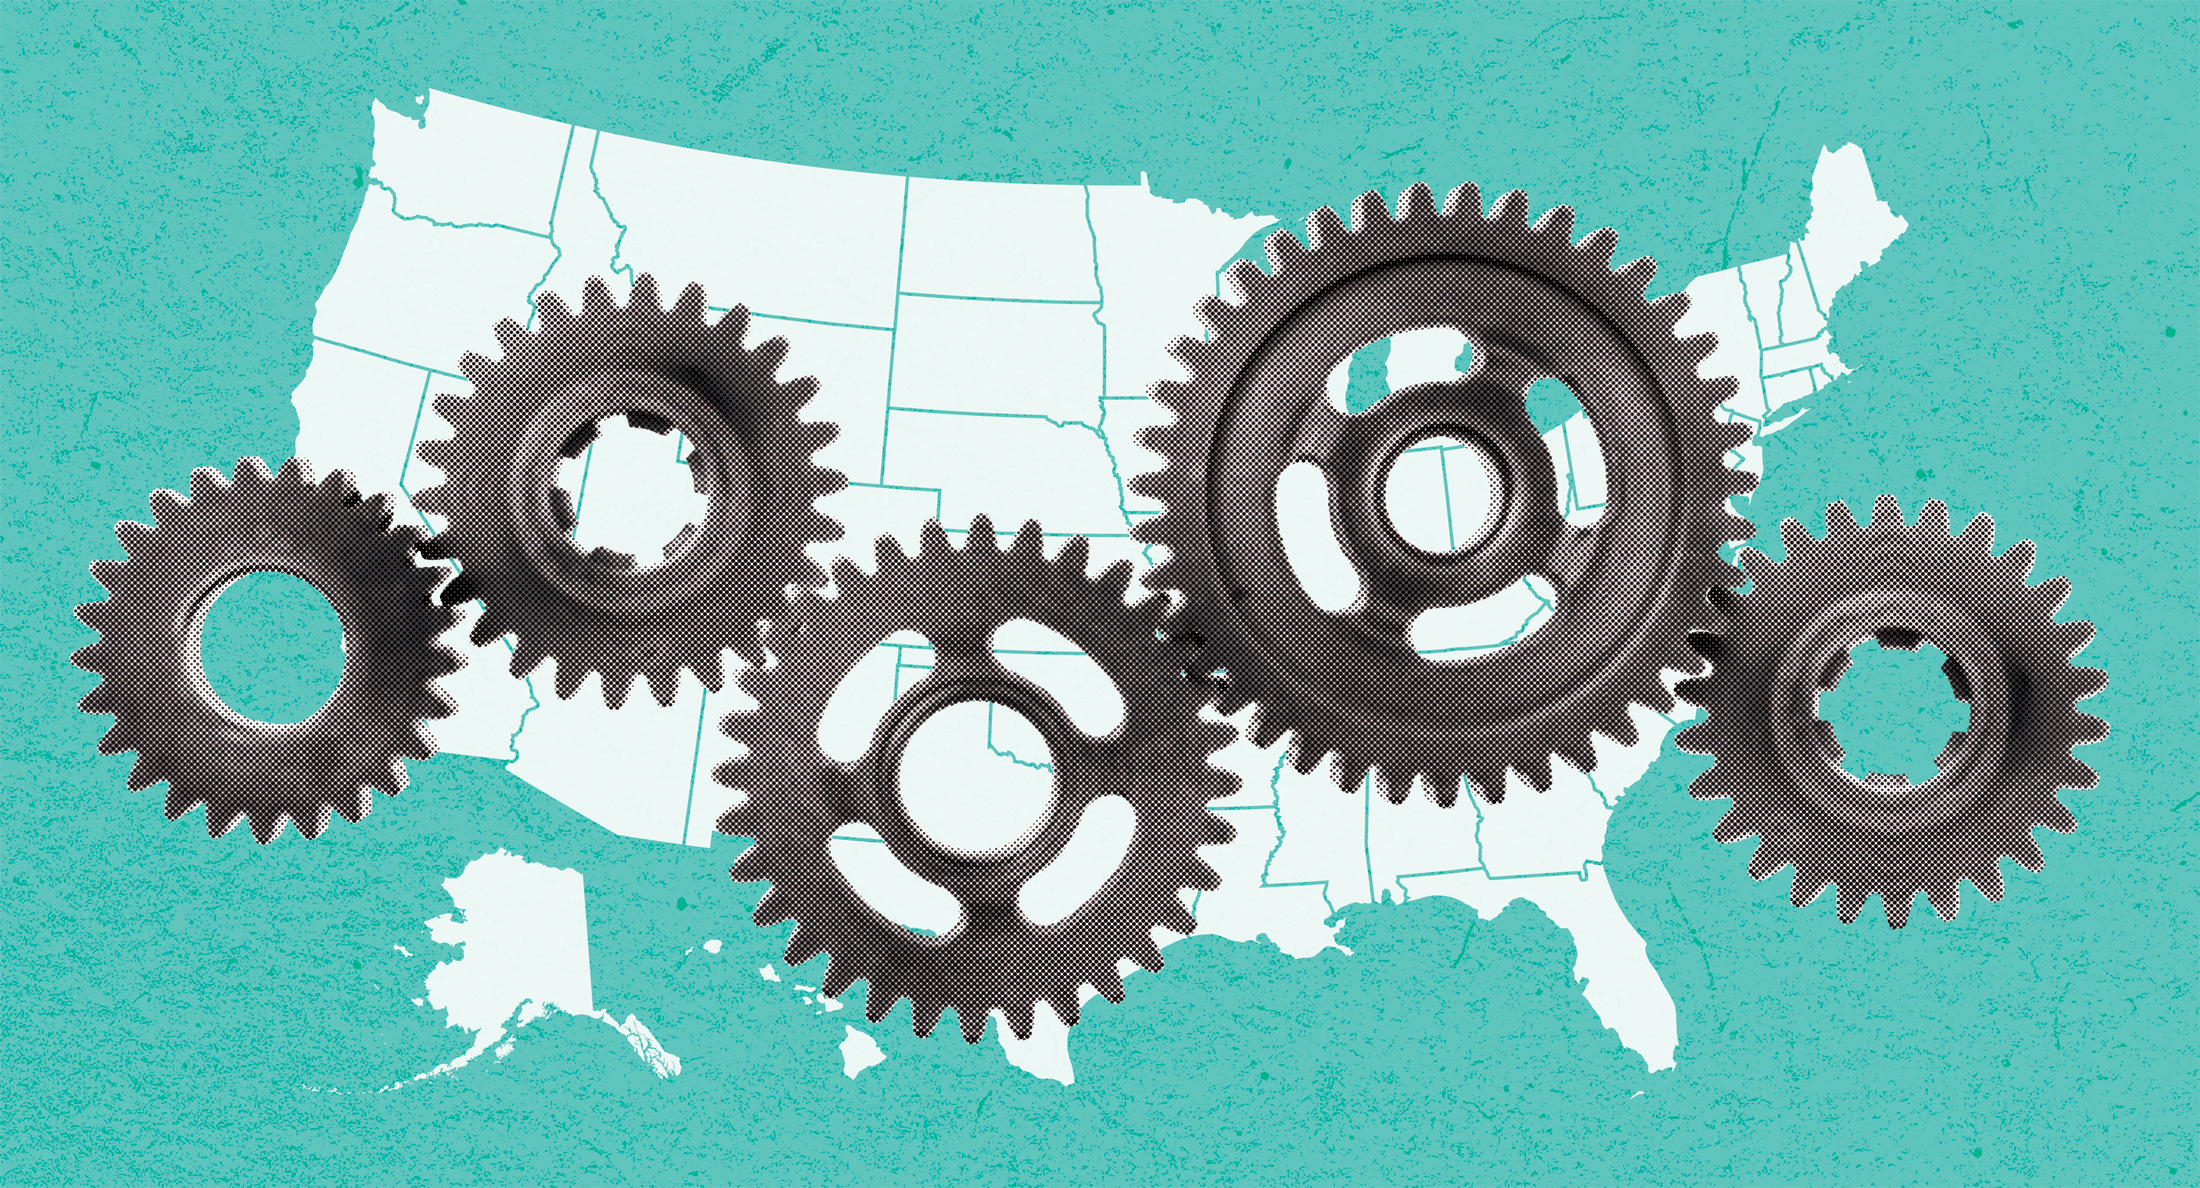 A series of connected gears over a drawing of the United States.